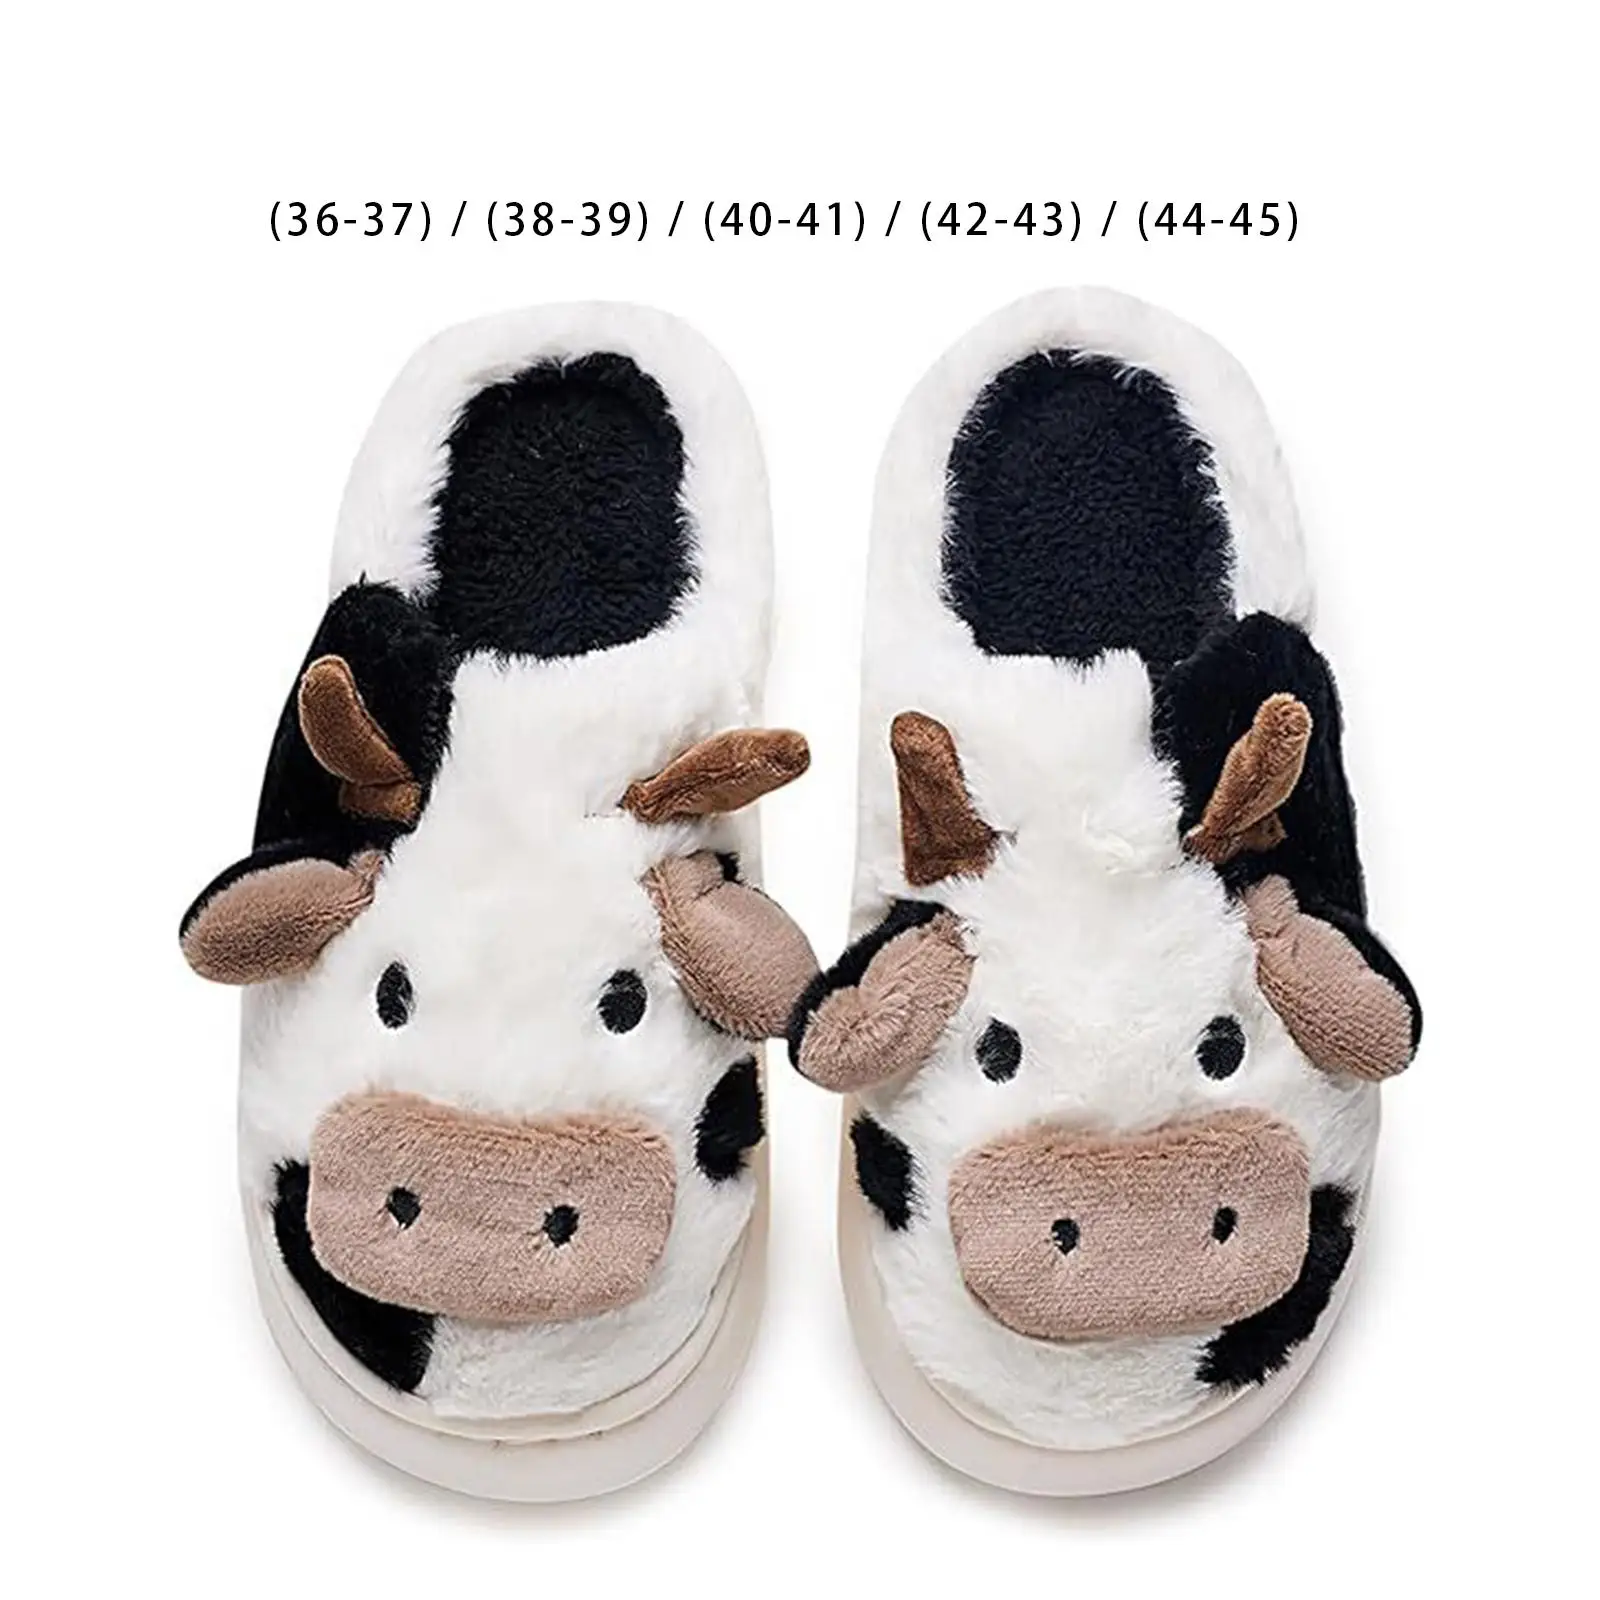 Winter Cow Plush Slippers Casual Birthday Gift Warm House Slippers Animal Indoor Shoes for Apartment Dorm Travel Bedroom Female